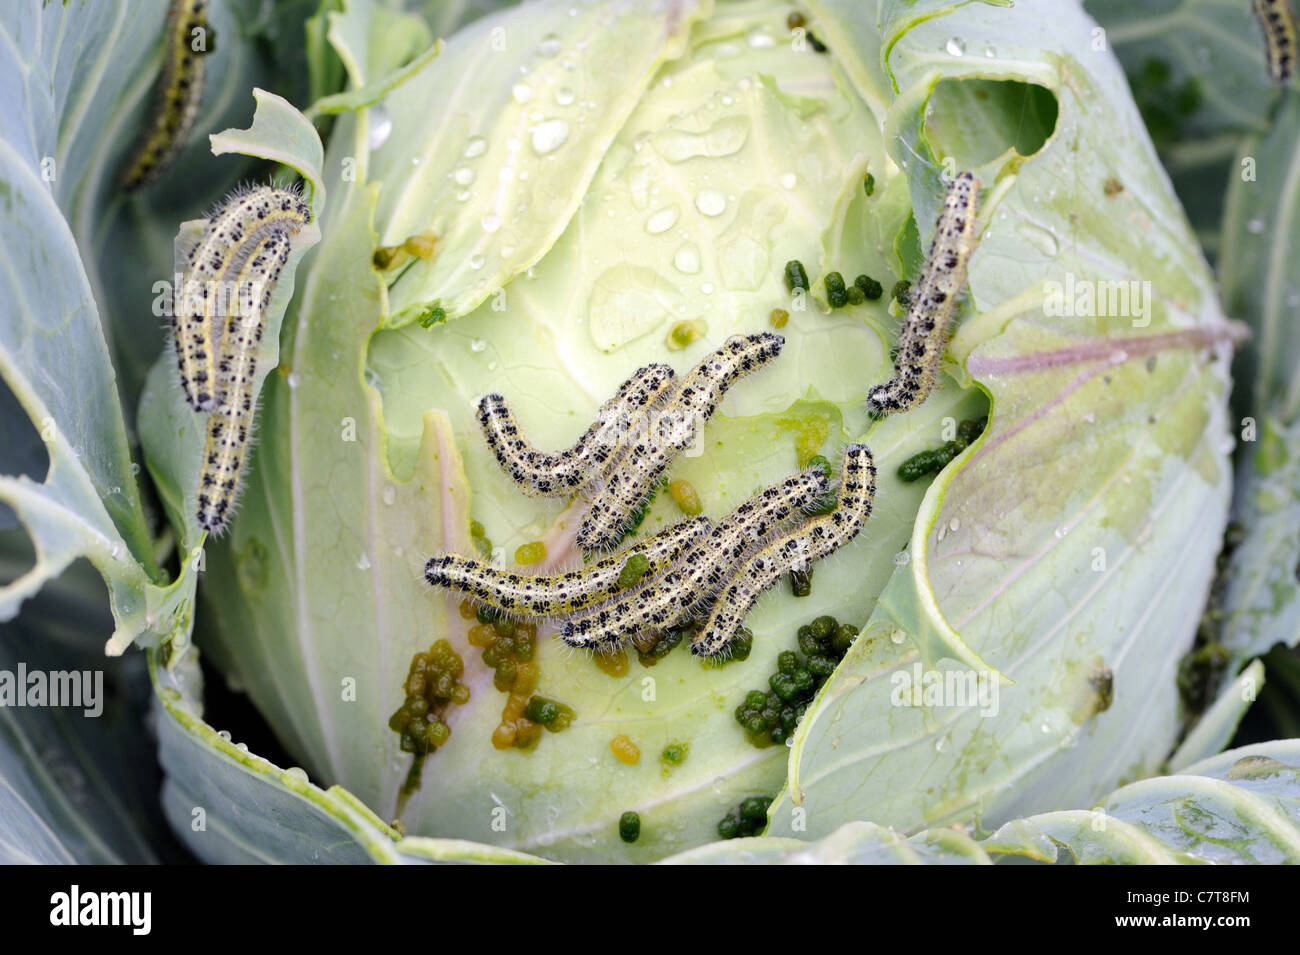 A cabbage is spoiled by an infestation of caterpillars in a mixed flower and vegetable garden.  Sumar, Nubra Valley, Ladakh, Stock Photo